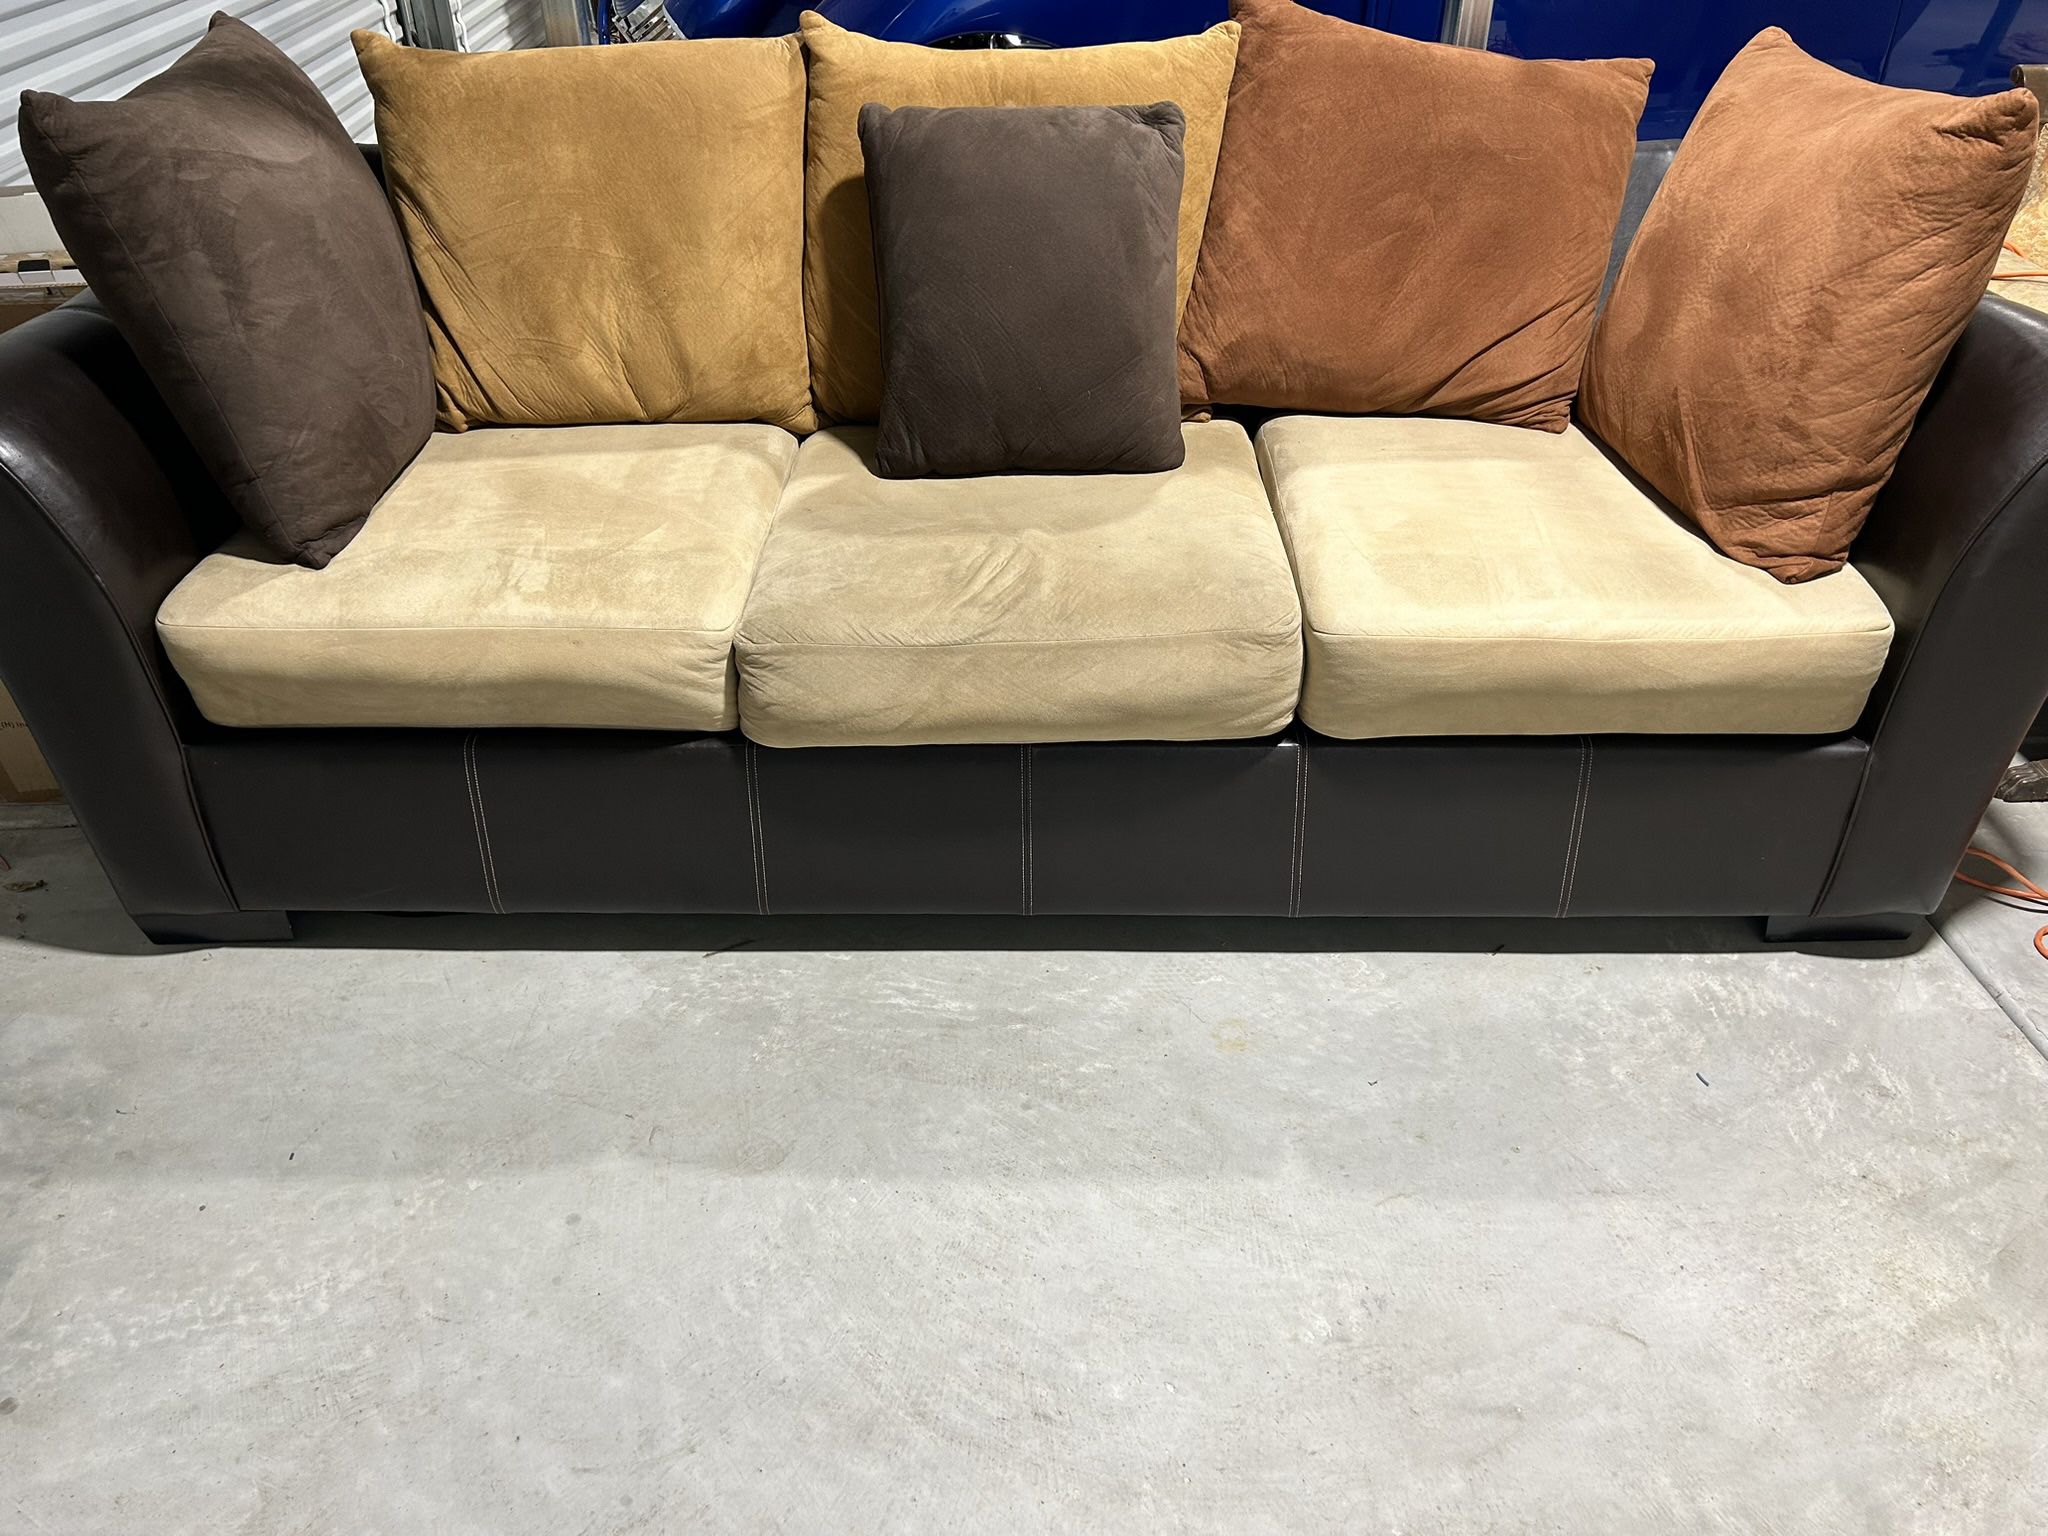 3 Cushion Light Brown / Black Comfy Couch 